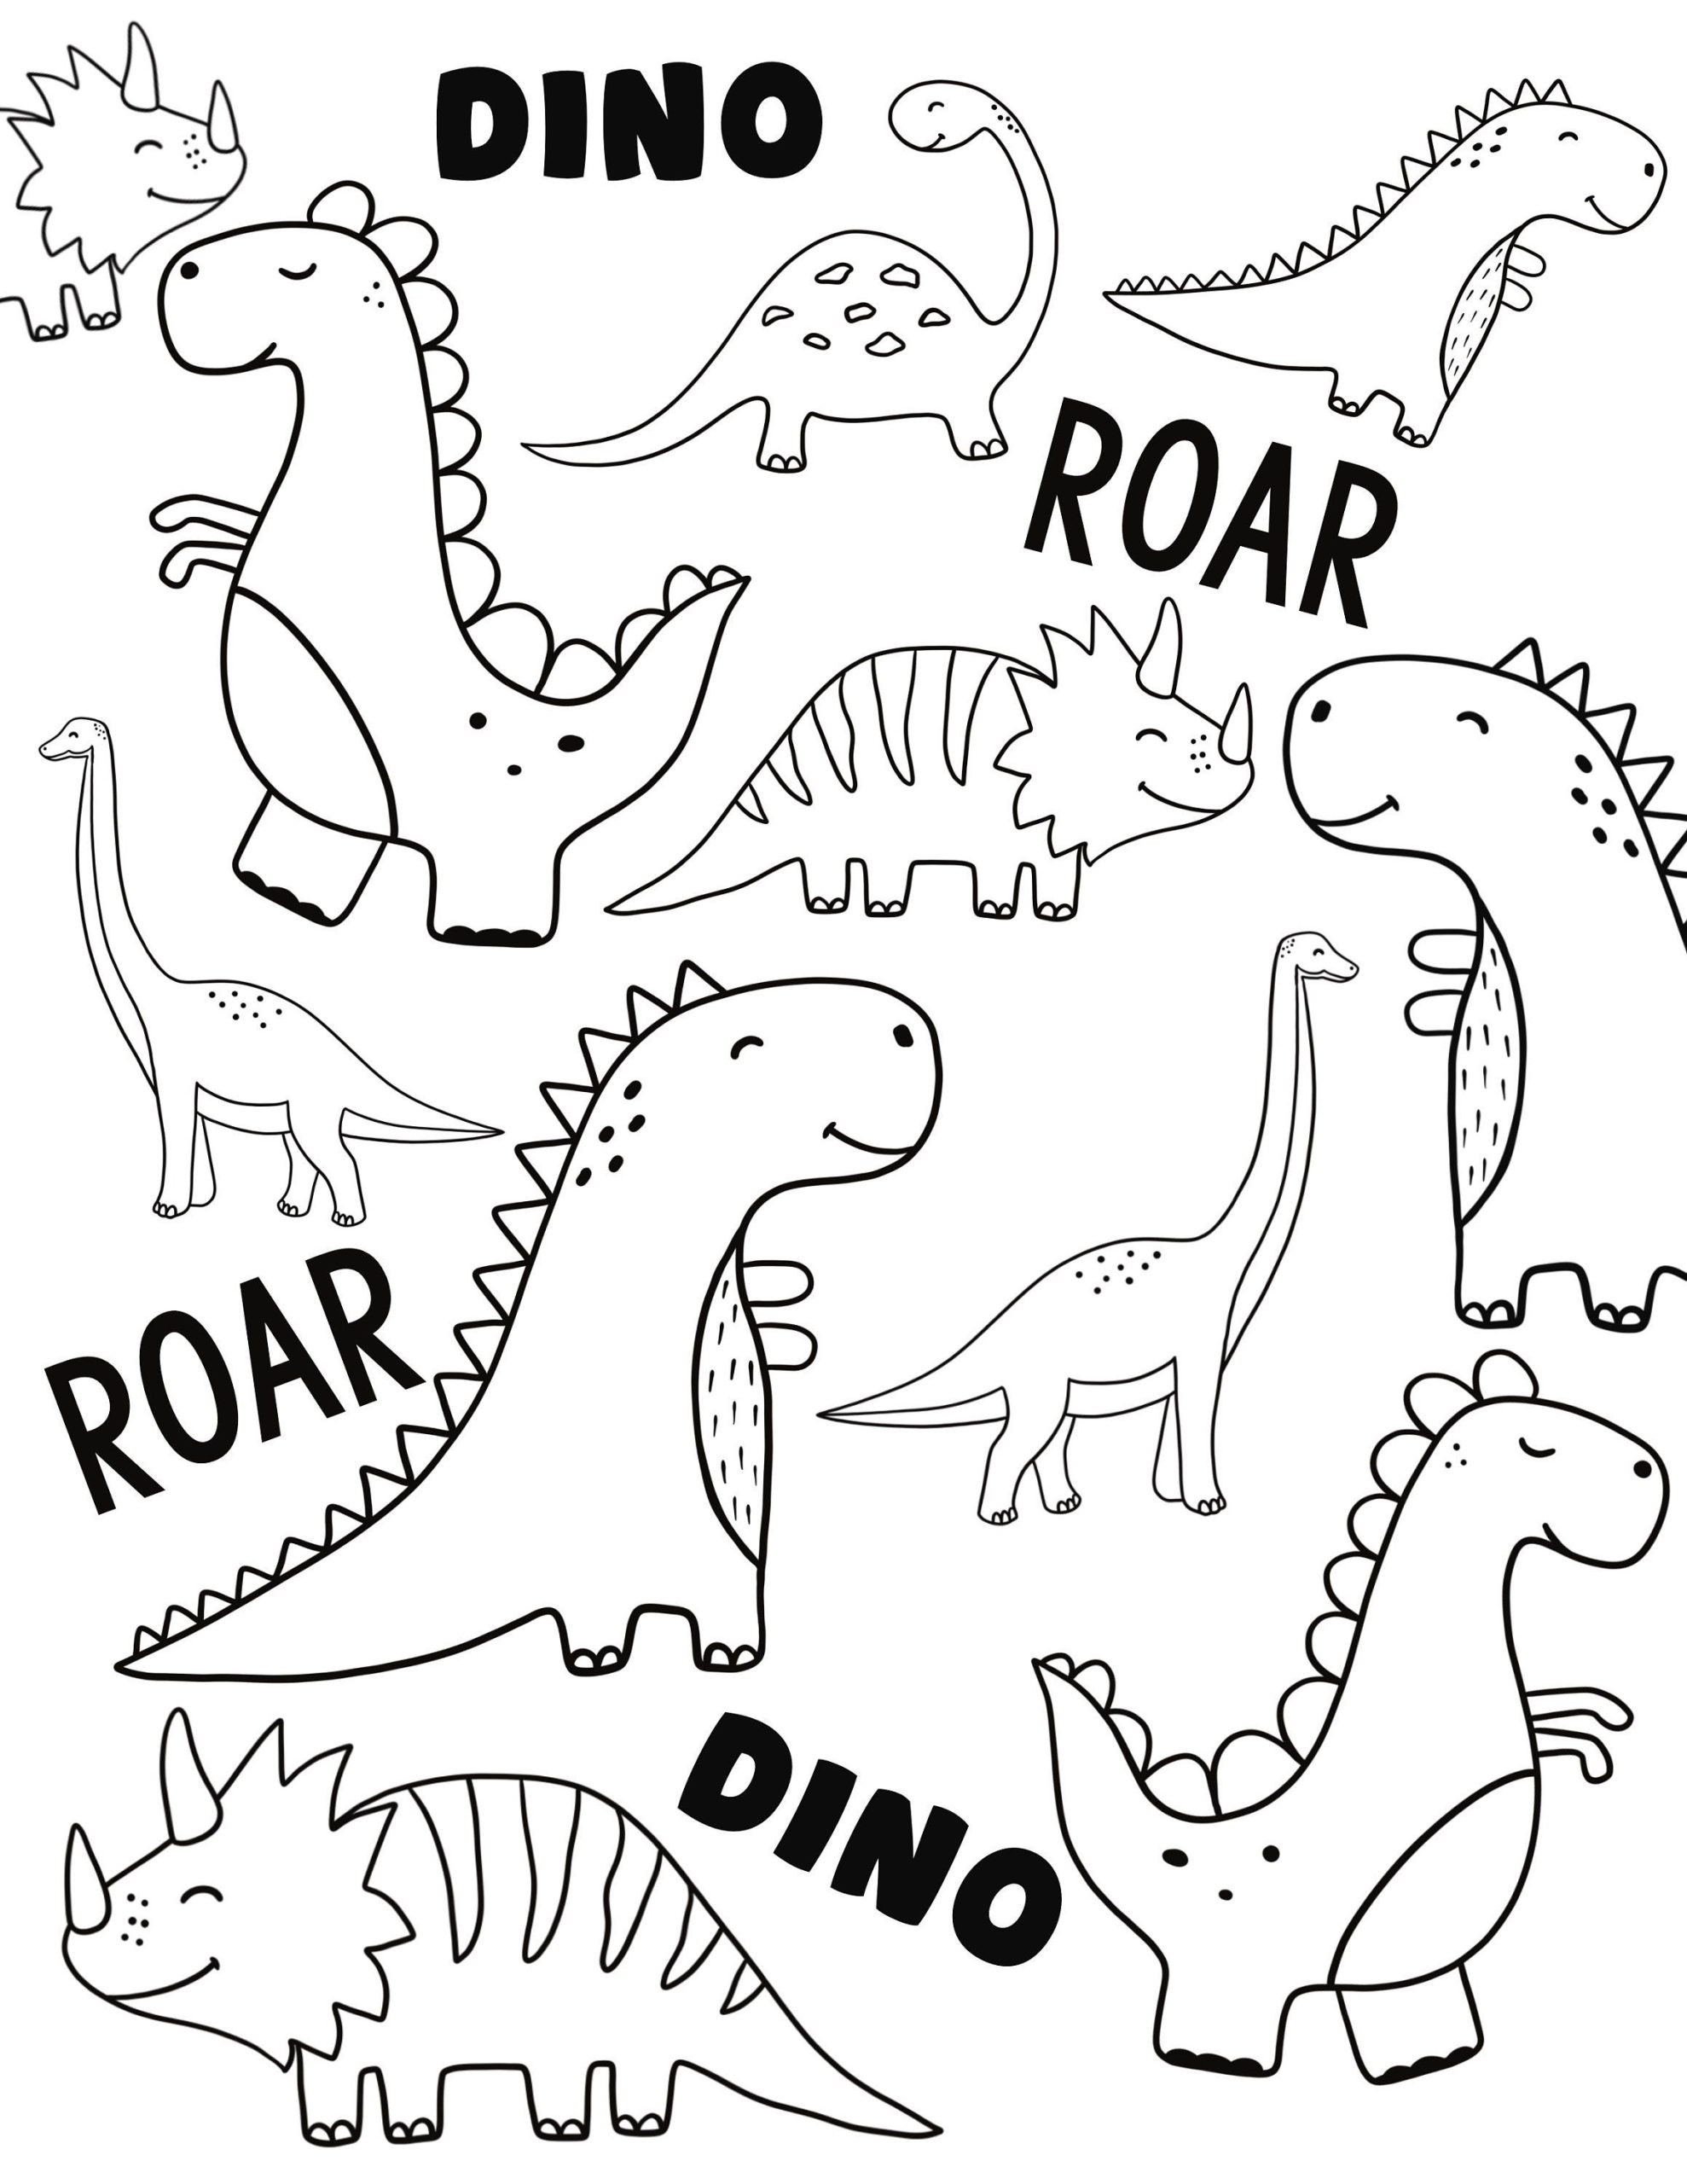 Dino coloring page, coloring pages, kids coloring, kids crafts, kids birthday, birthday craft